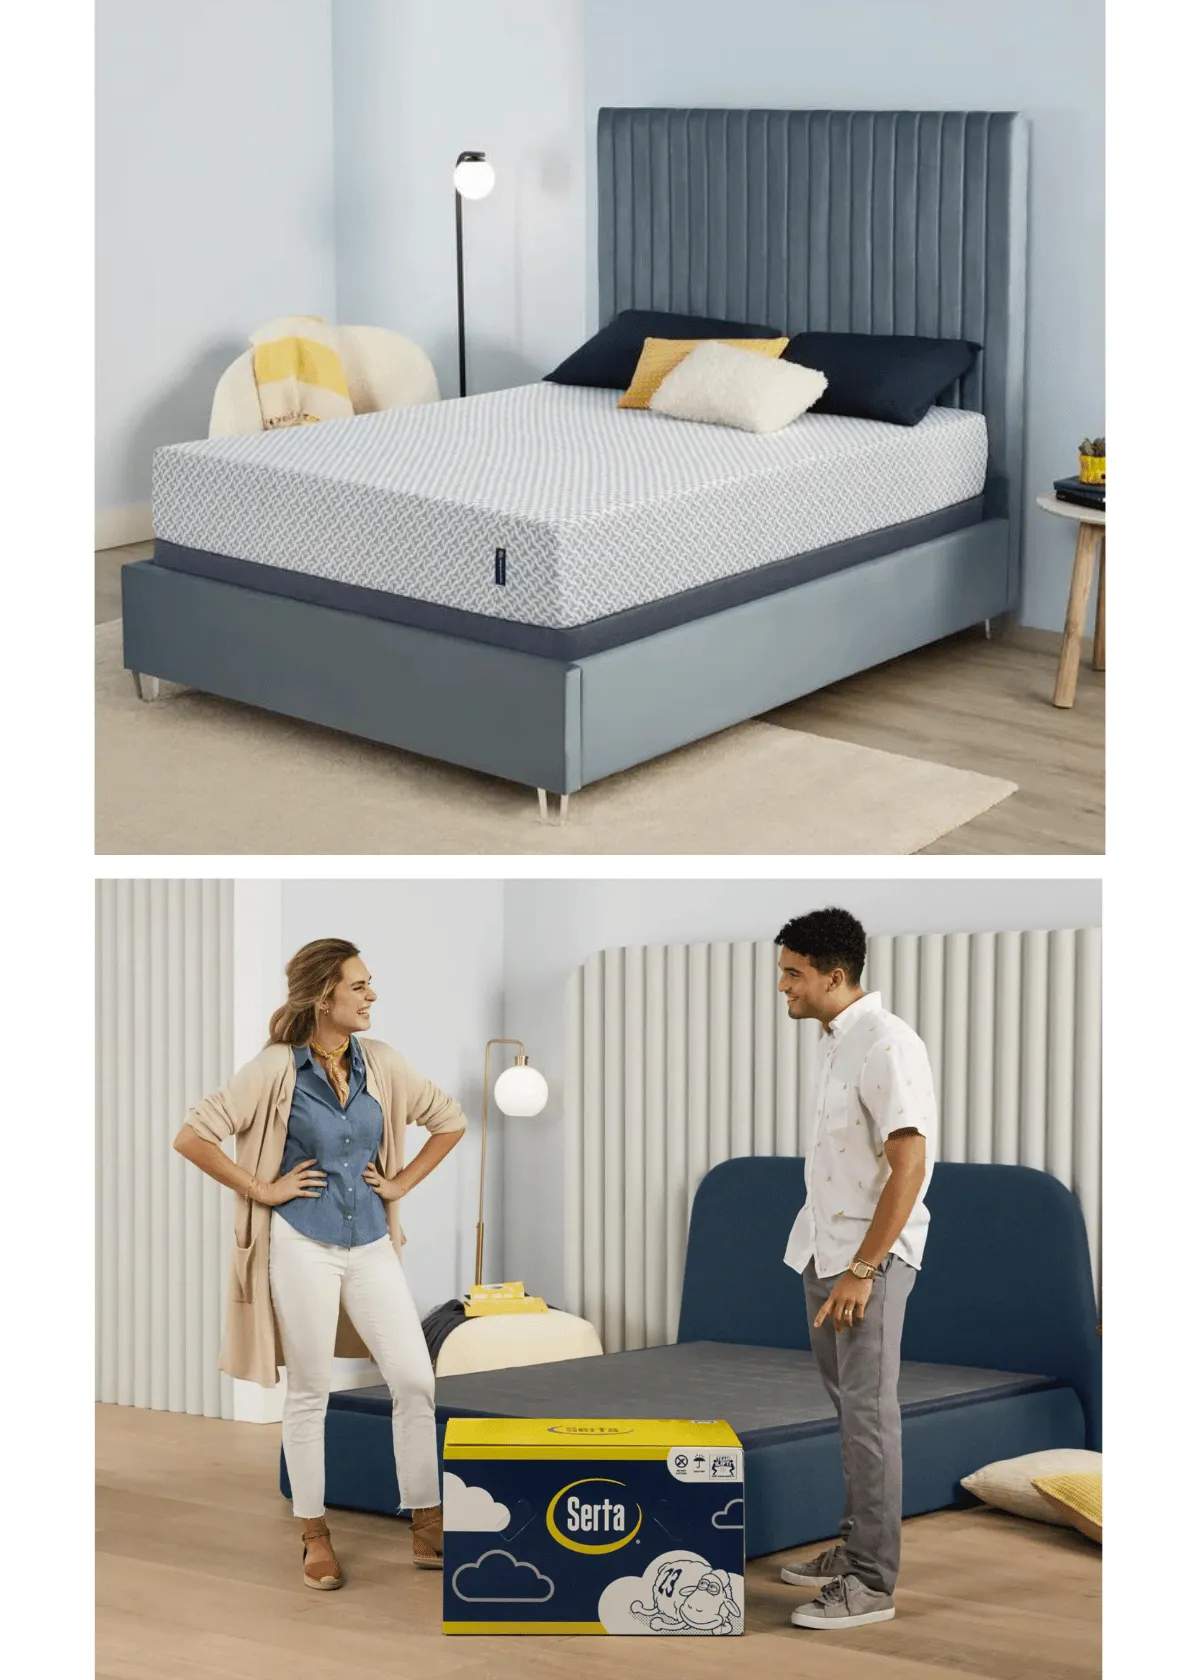 "Is the Serta Memory Foam Mattress Right for Your Sleep Needs?"